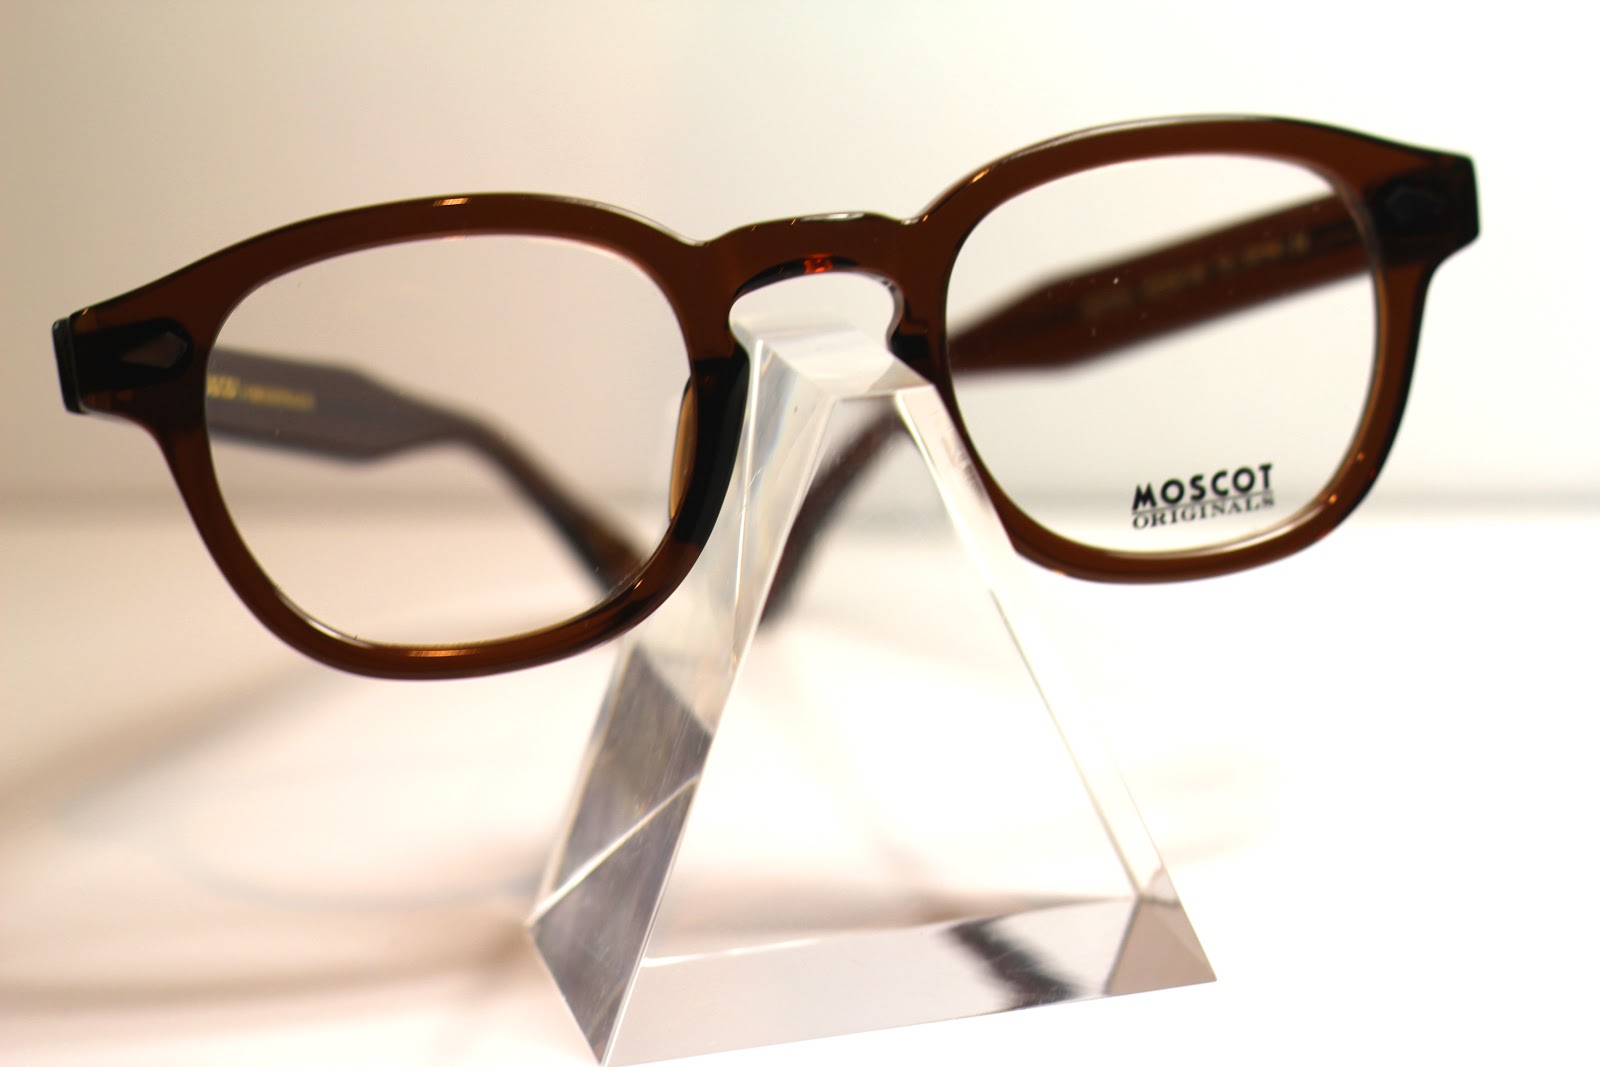 SPECTACLE LOVES YOU.: Restock of MOSCOT Eyewear and New Colours Coming